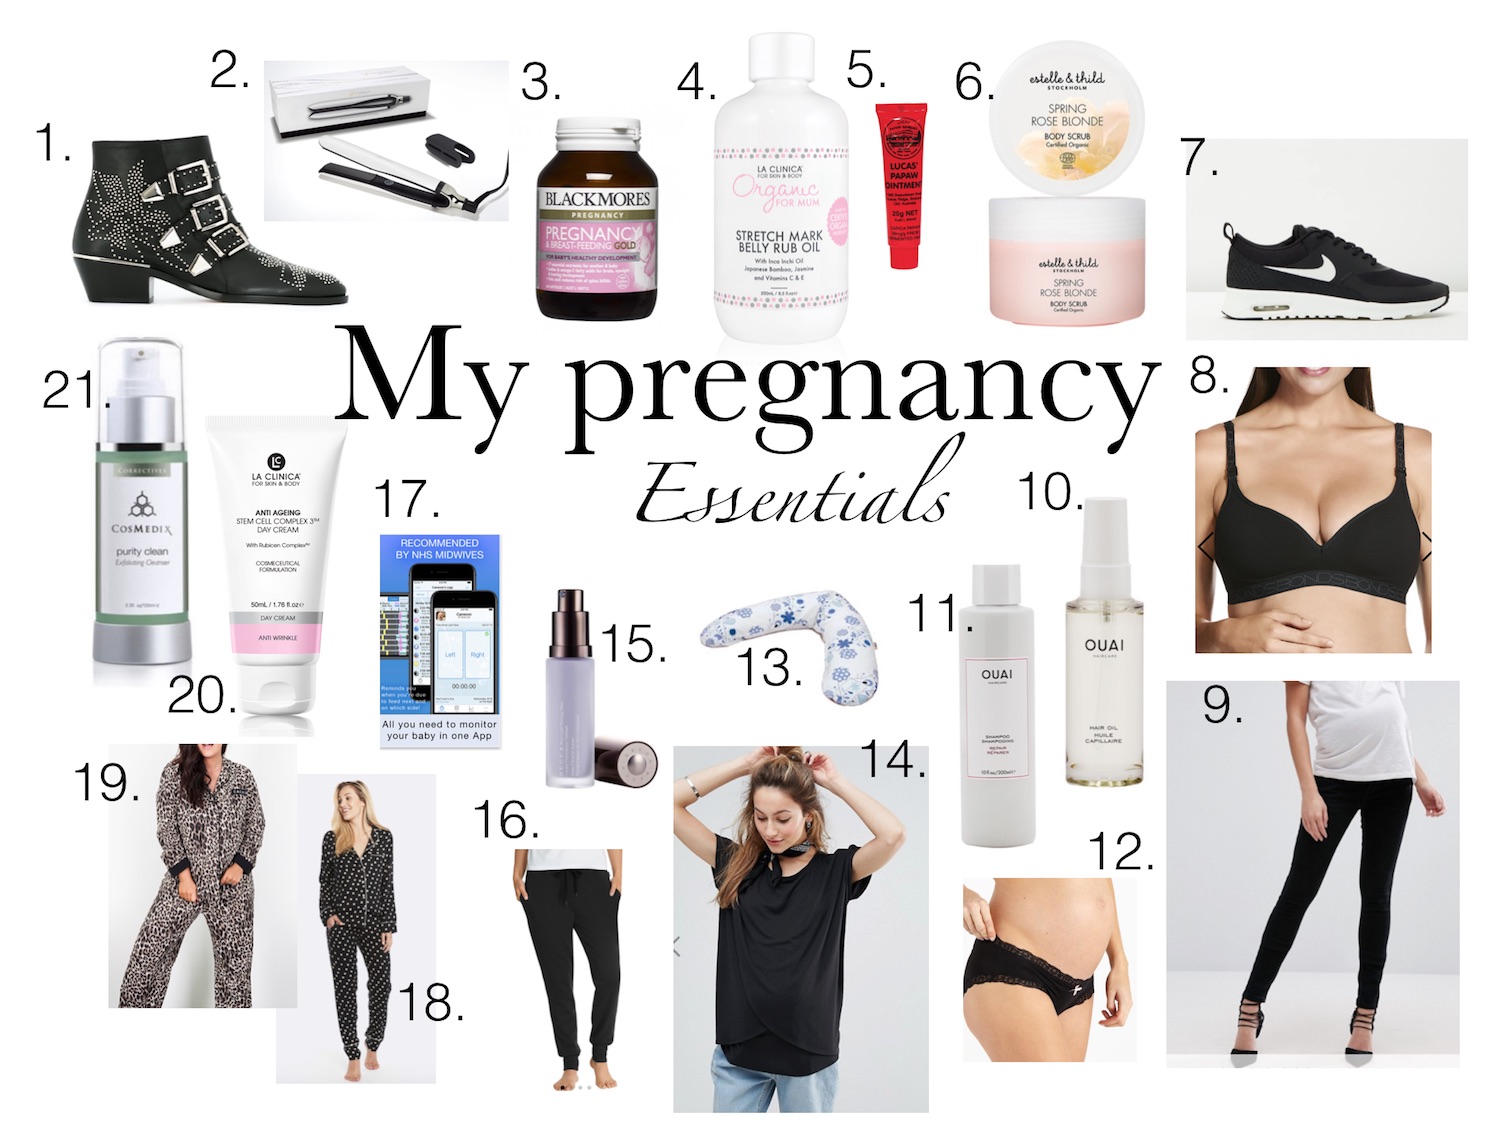 My 21 pregnancy essentials - What Would Karl Do